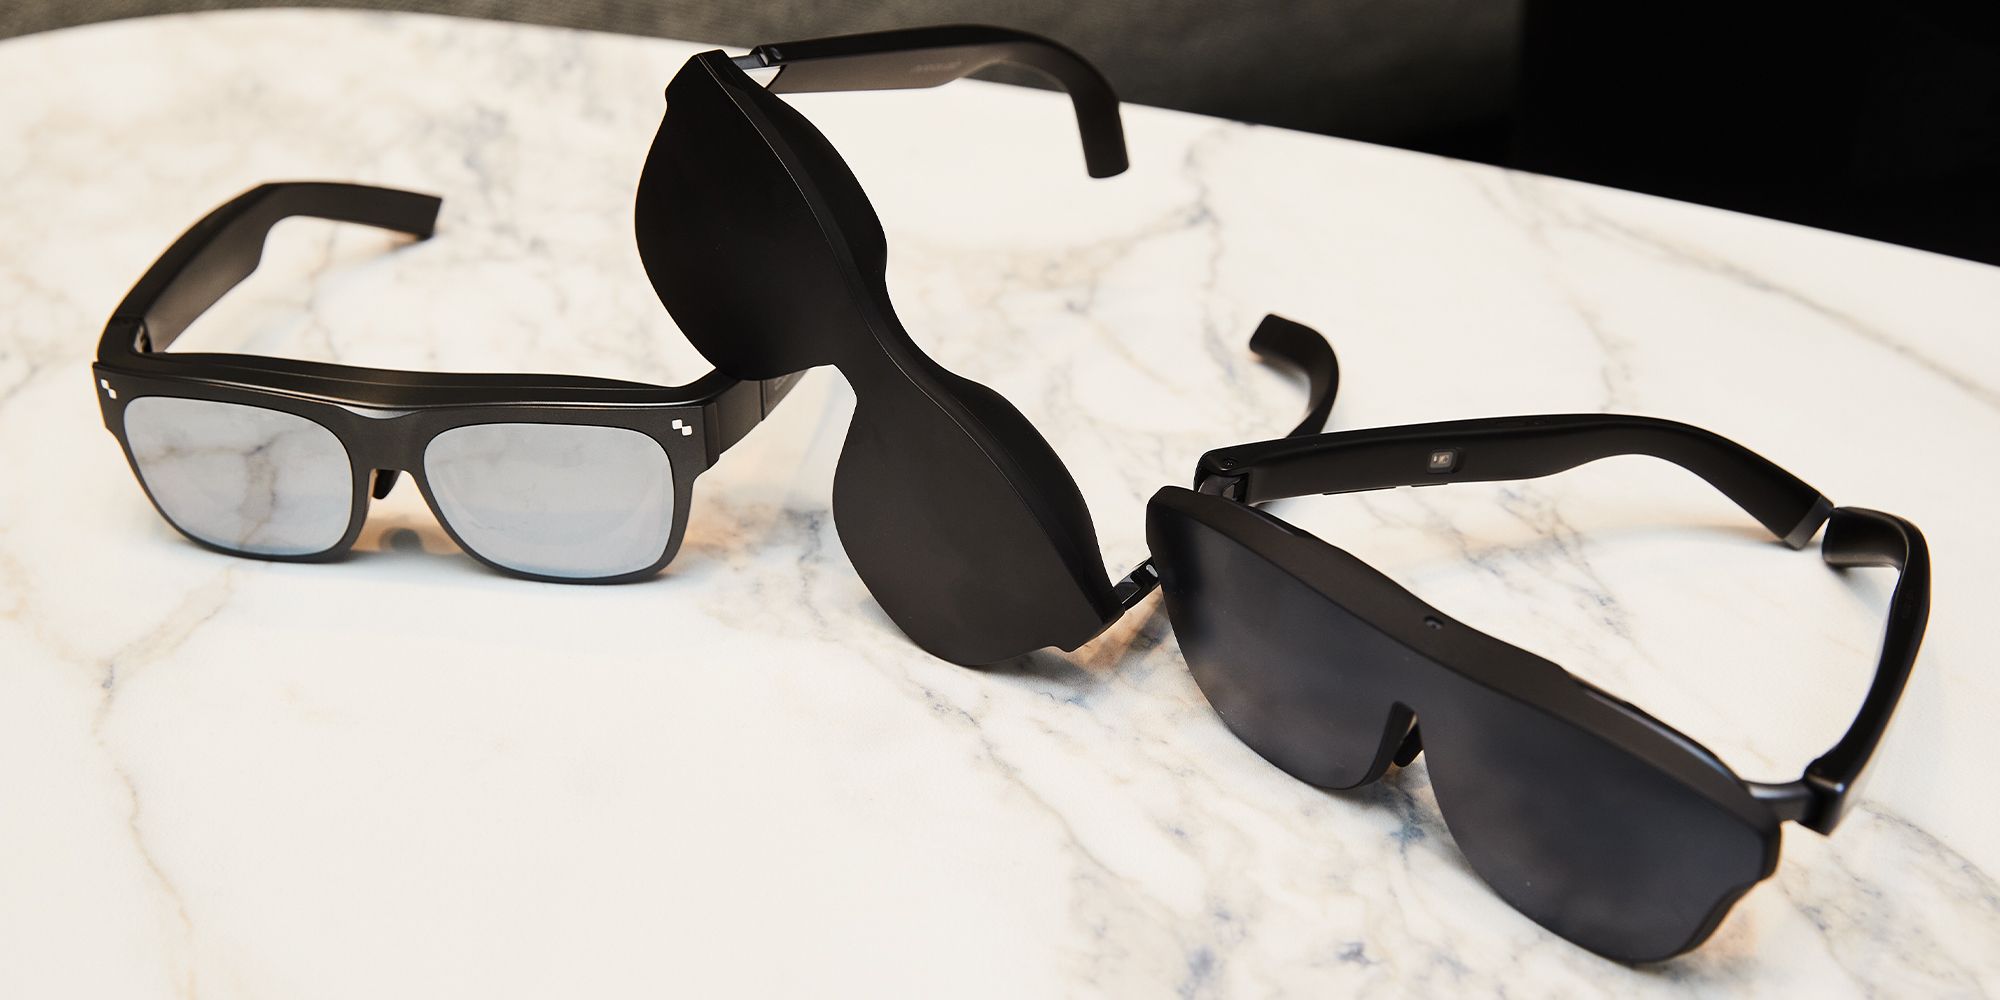 These smart glasses put 500-nit screens right on your eyes